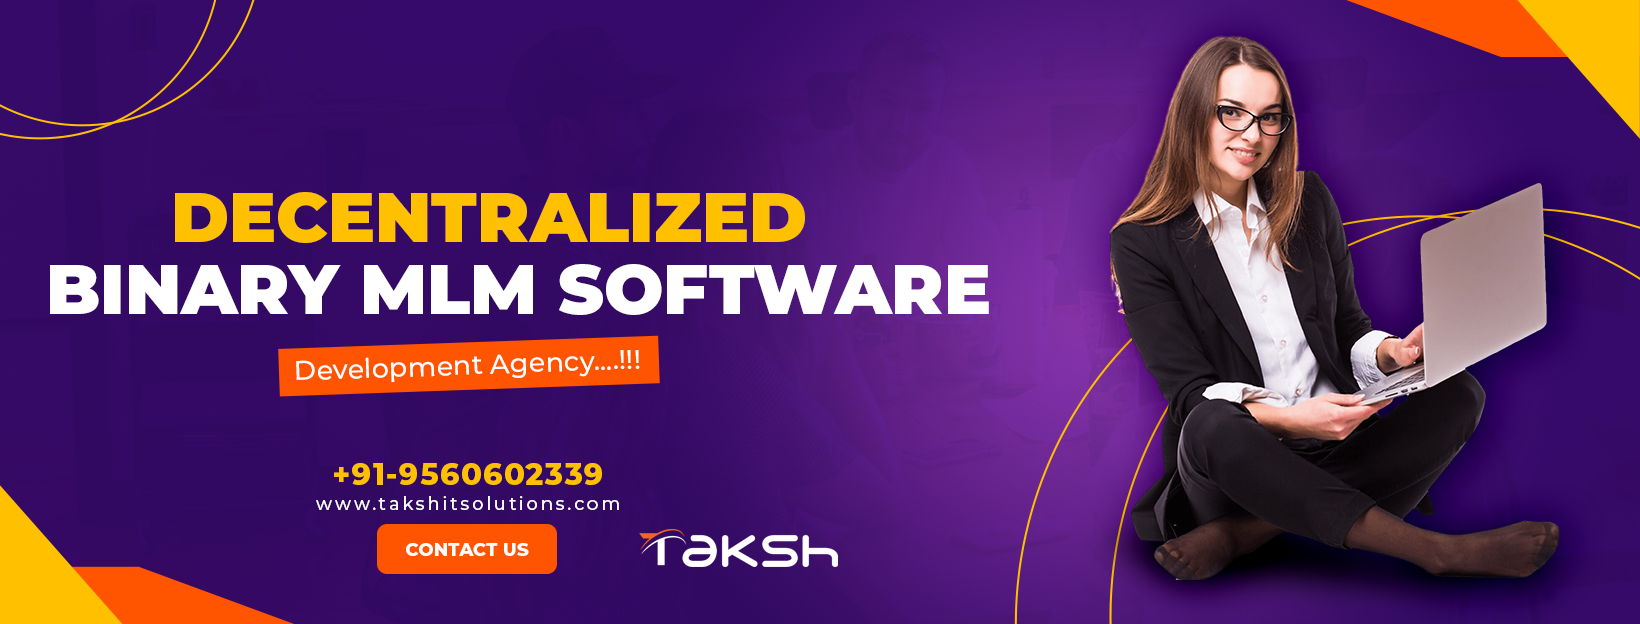 Decentralized Binary MLM Software Development Company || Taksh IT Solutions Private Limited